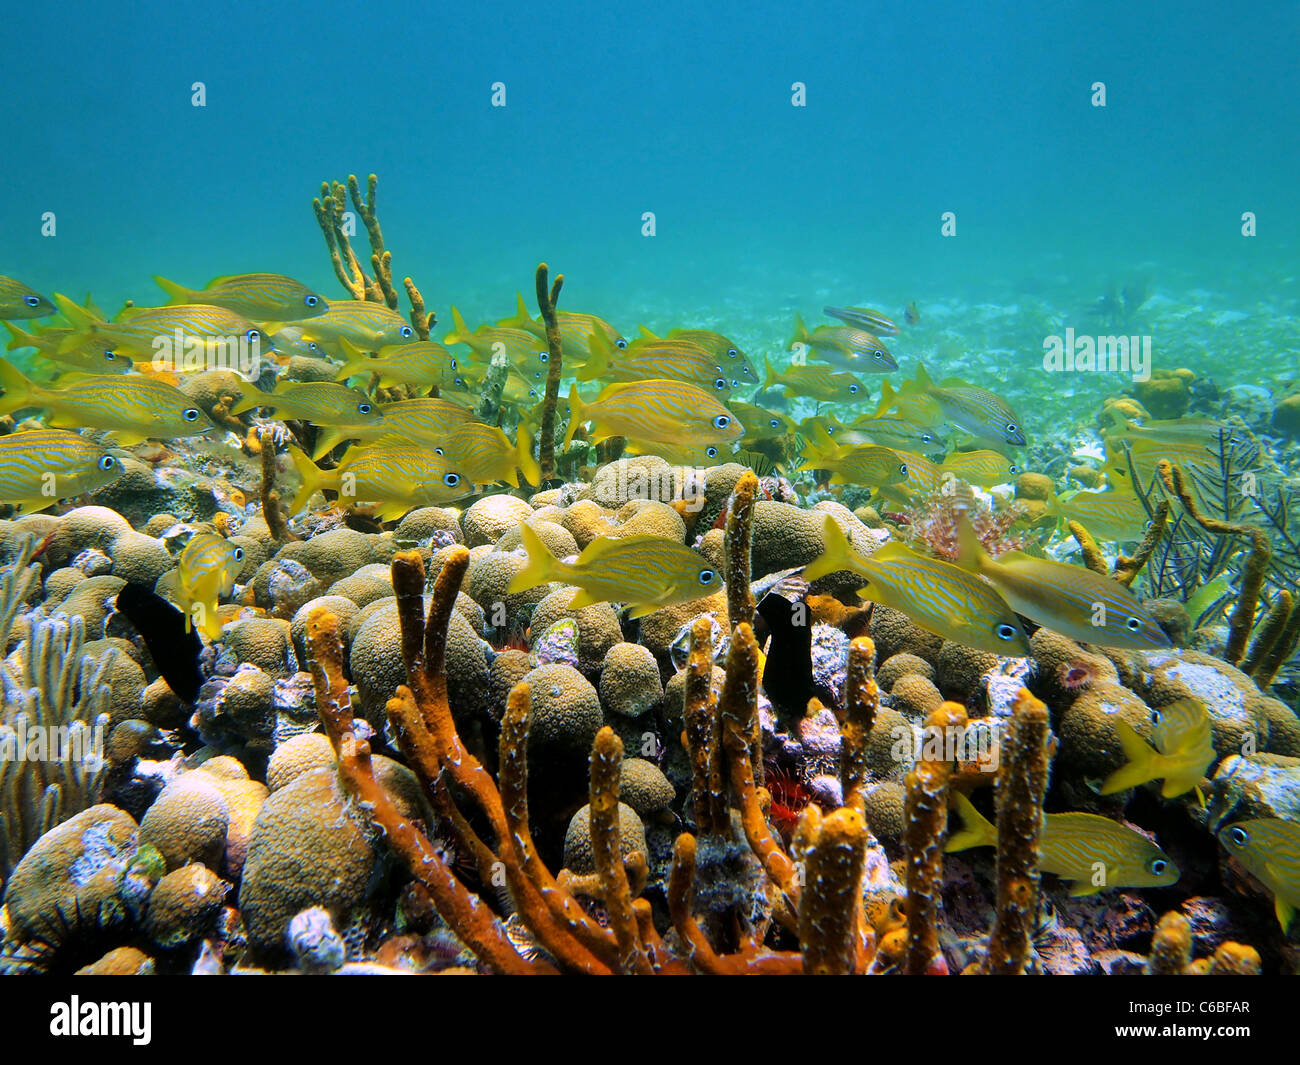 Coral and french grunt fish in the caribbean sea, Panama Stock Photo